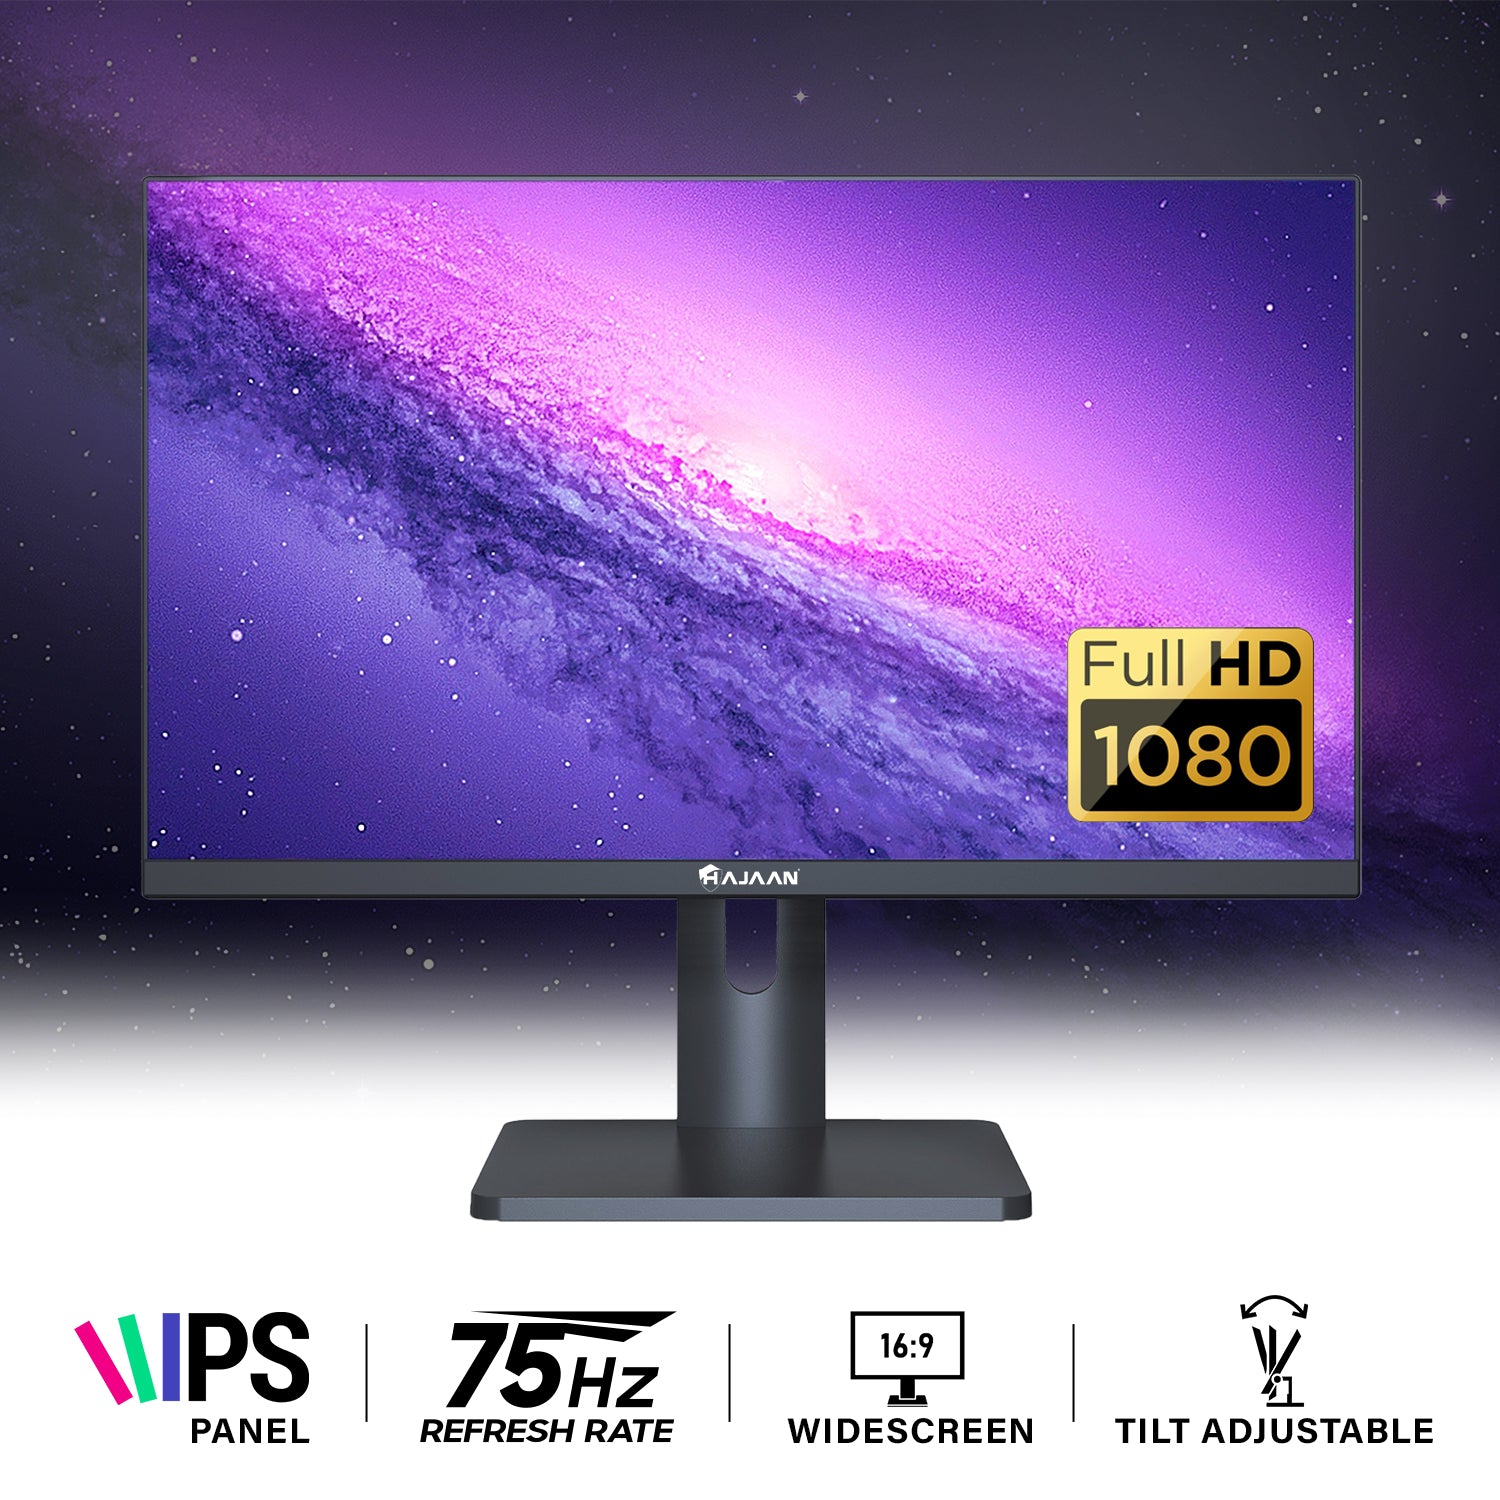 HAJAAN 24” FHD IPS Desktop Monitor, 75Hz Refresh Rate with Ultra Thin Bazel, Tilt Adjustable, Ideal for Office & Home, HDMI, VGA Ports | Monitor for PC, Wall Mountable, Black (S2423i)- 1 Year warranty